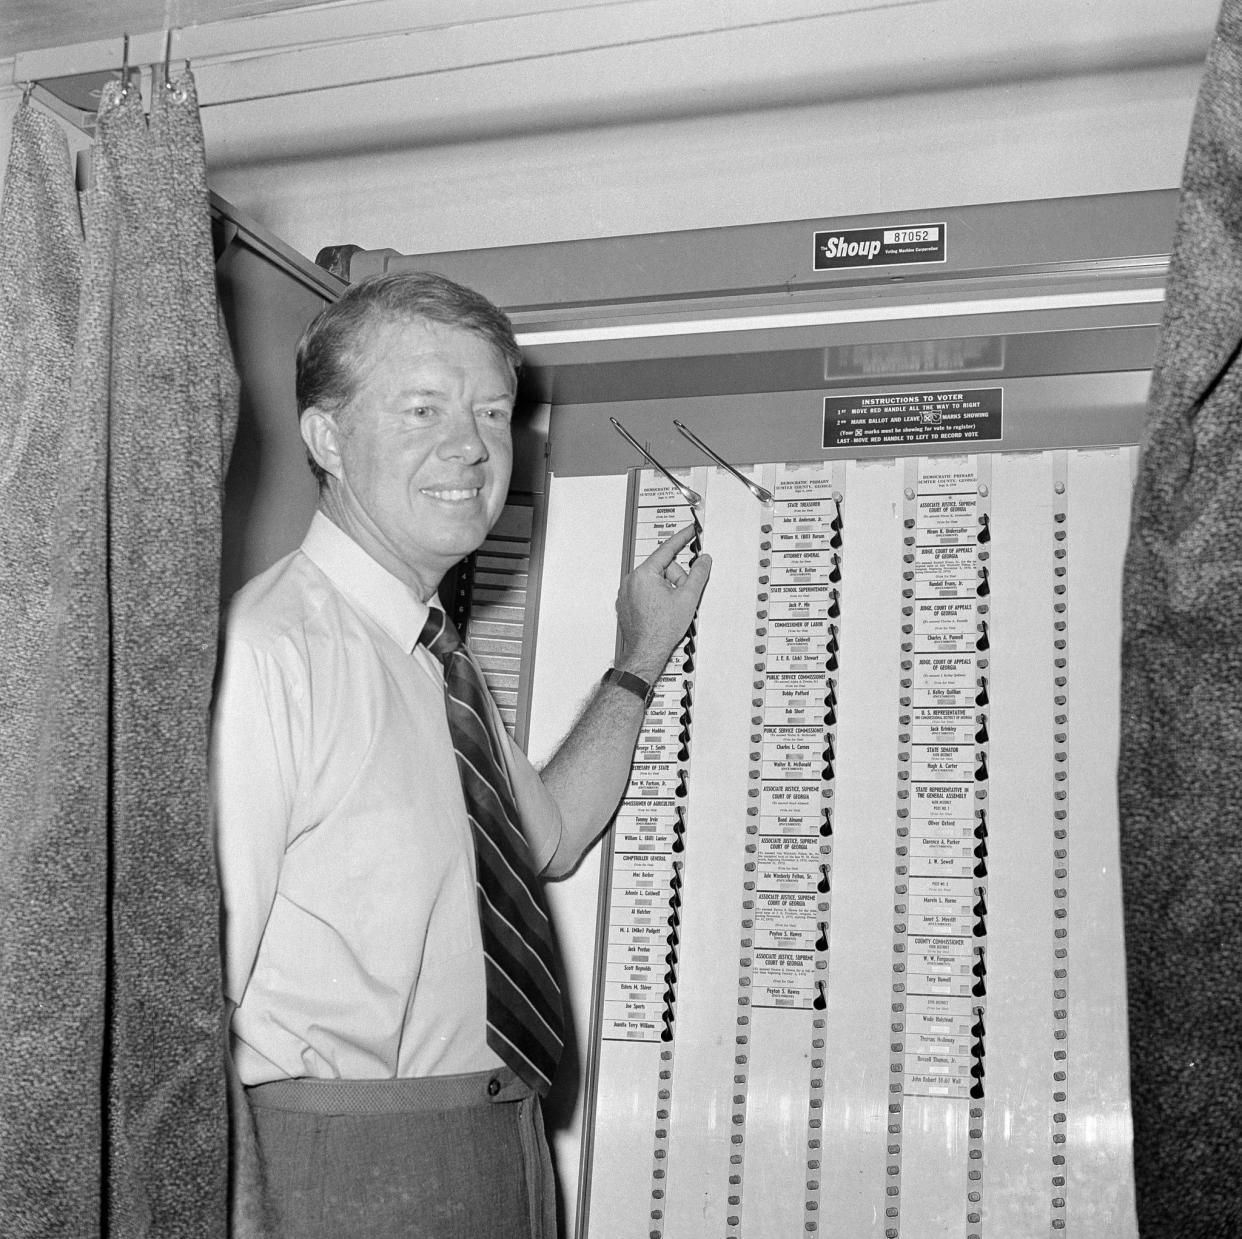 Jimmy Carter, the Democratic gubernatorial candidate, points to his name in a voting machine as he casts his primary vote on Sept. 9, 1970, in his hometown of Plains, Ga.